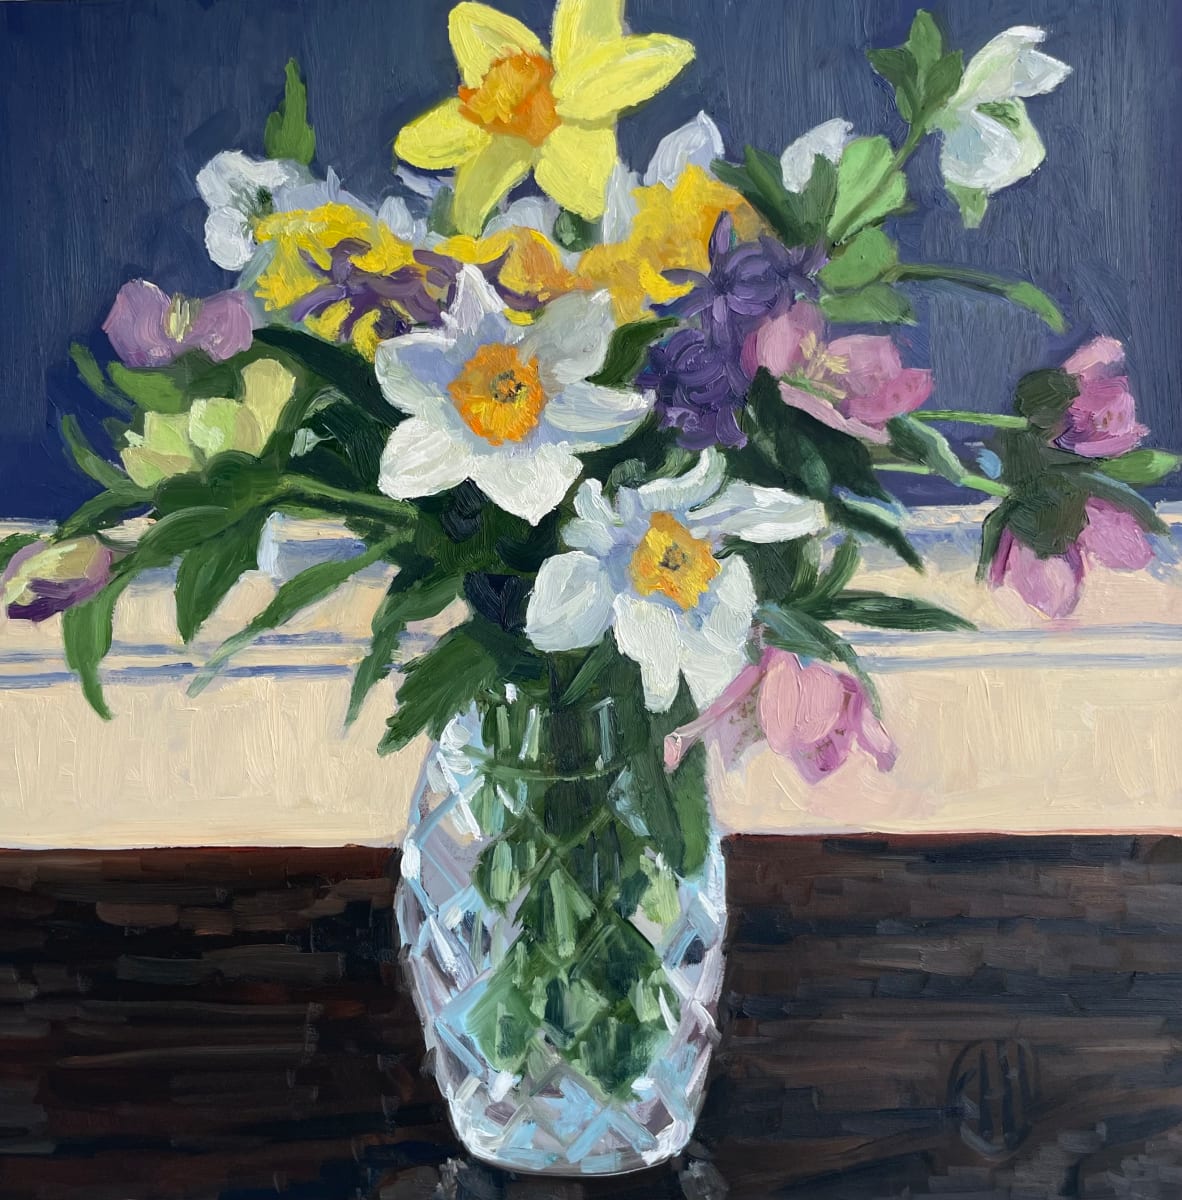 Daffordils and Hellebores by Christy Hegarty 